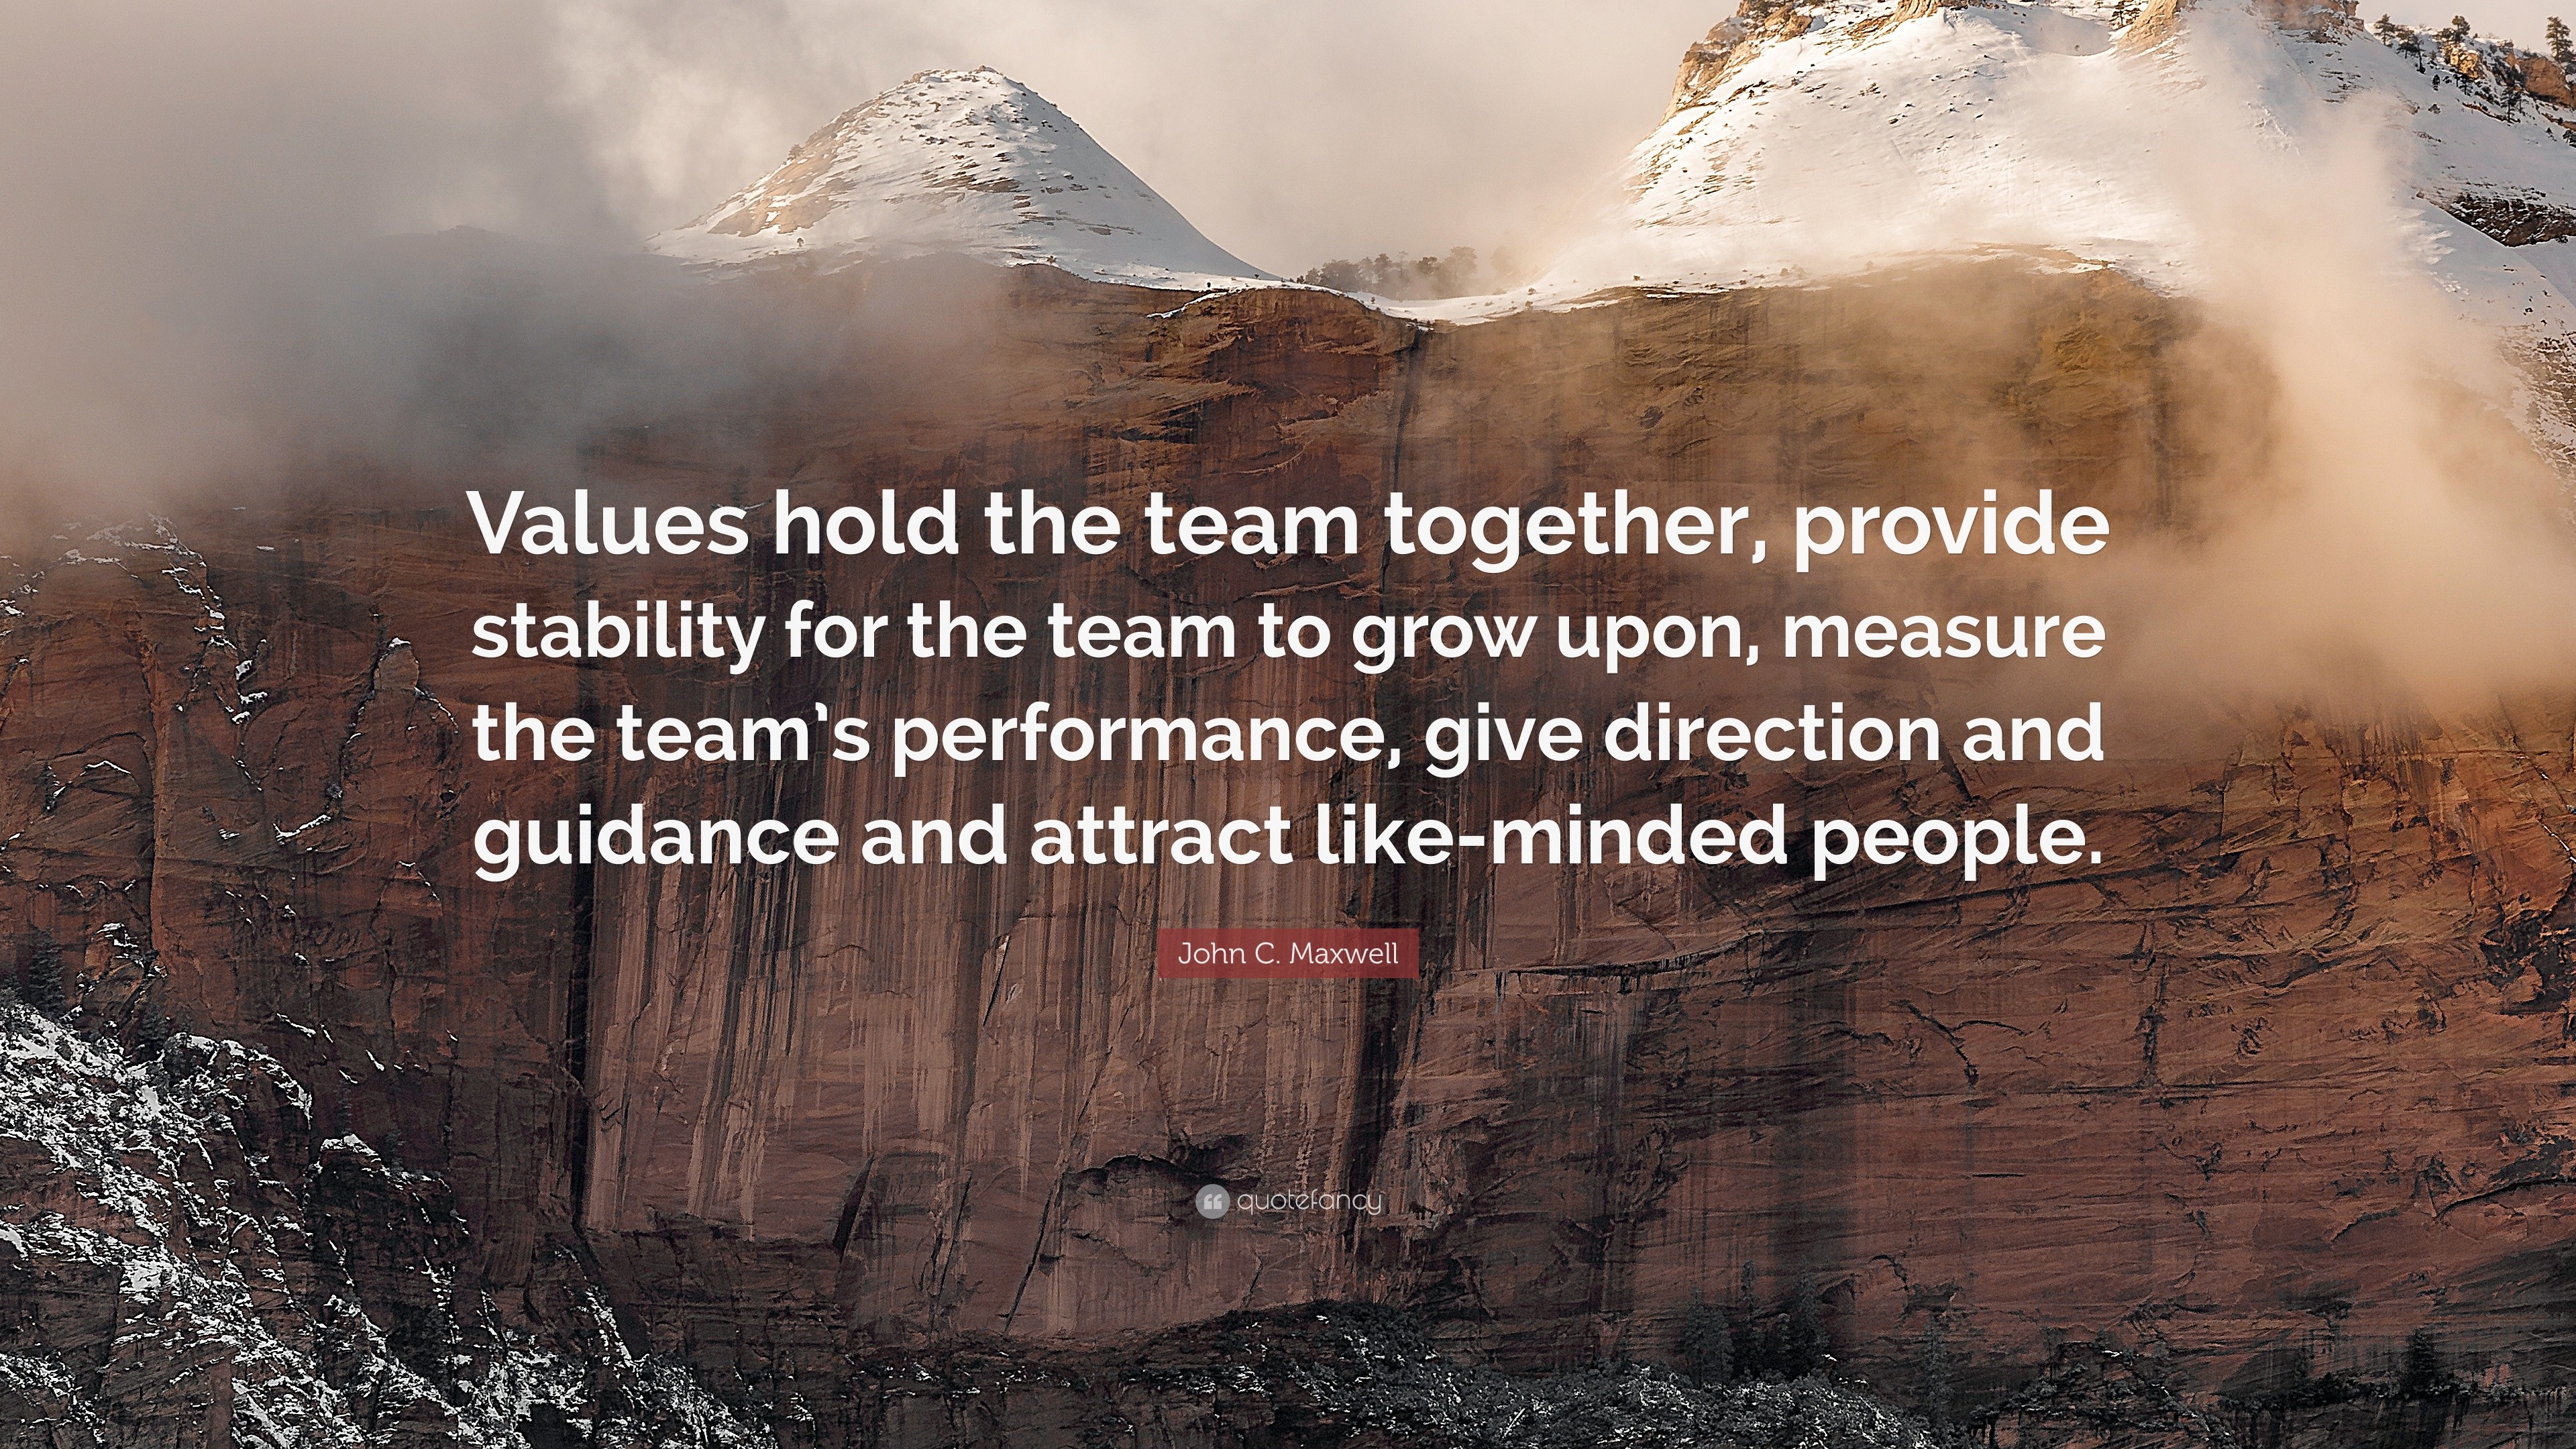 https://quotefancy.com/media/wallpaper/3840x2160/1760138-John-C-Maxwell-Quote-Values-hold-the-team-together-provide.jpg